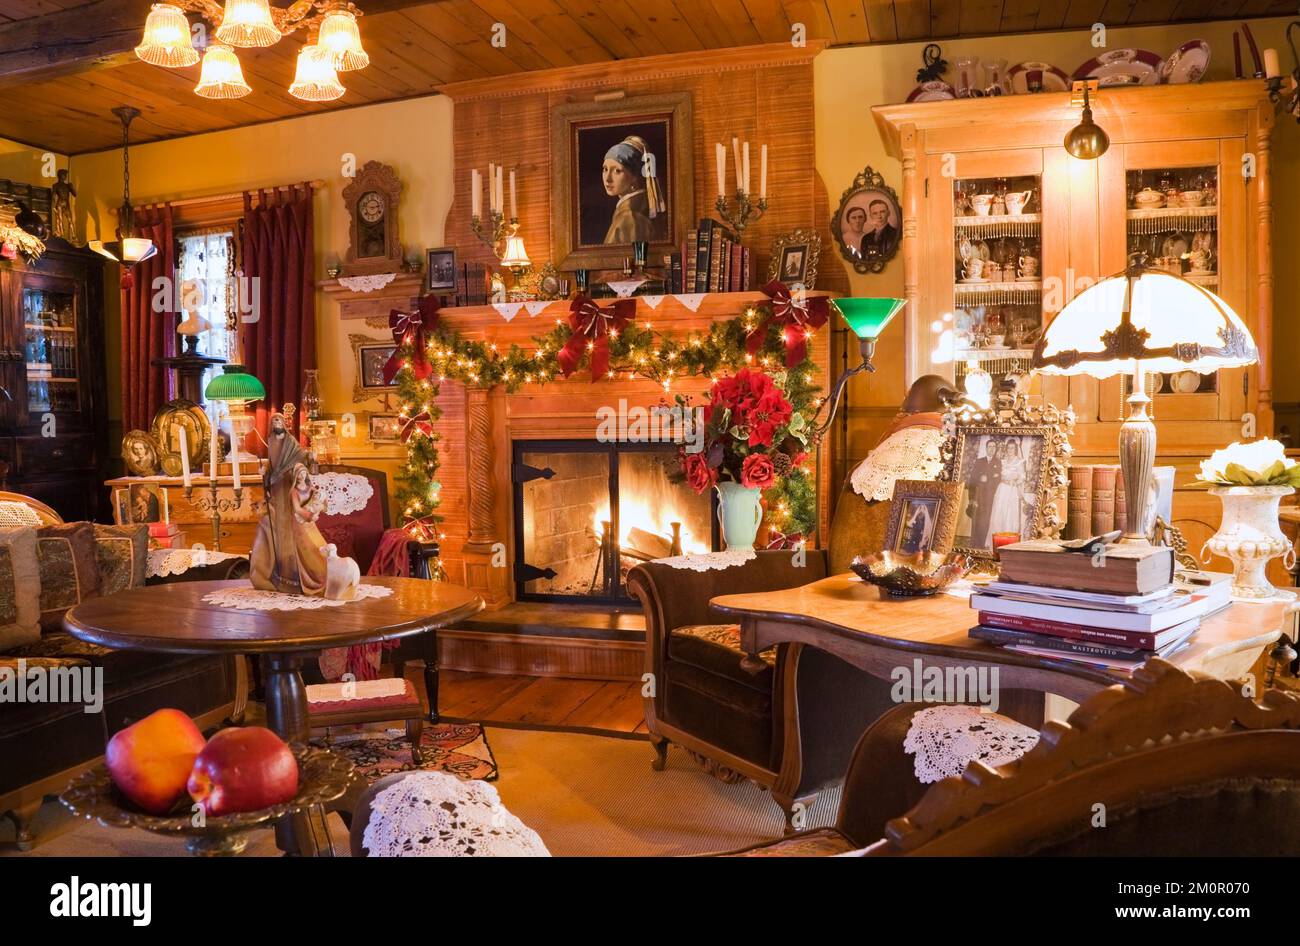 https://c8.alamy.com/comp/2M0R070/lavishly-decorated-living-room-at-christmas-time-inside-1977-built-replica-of-old-1800s-canadiana-cottage-style-log-cabin-2M0R070.jpg